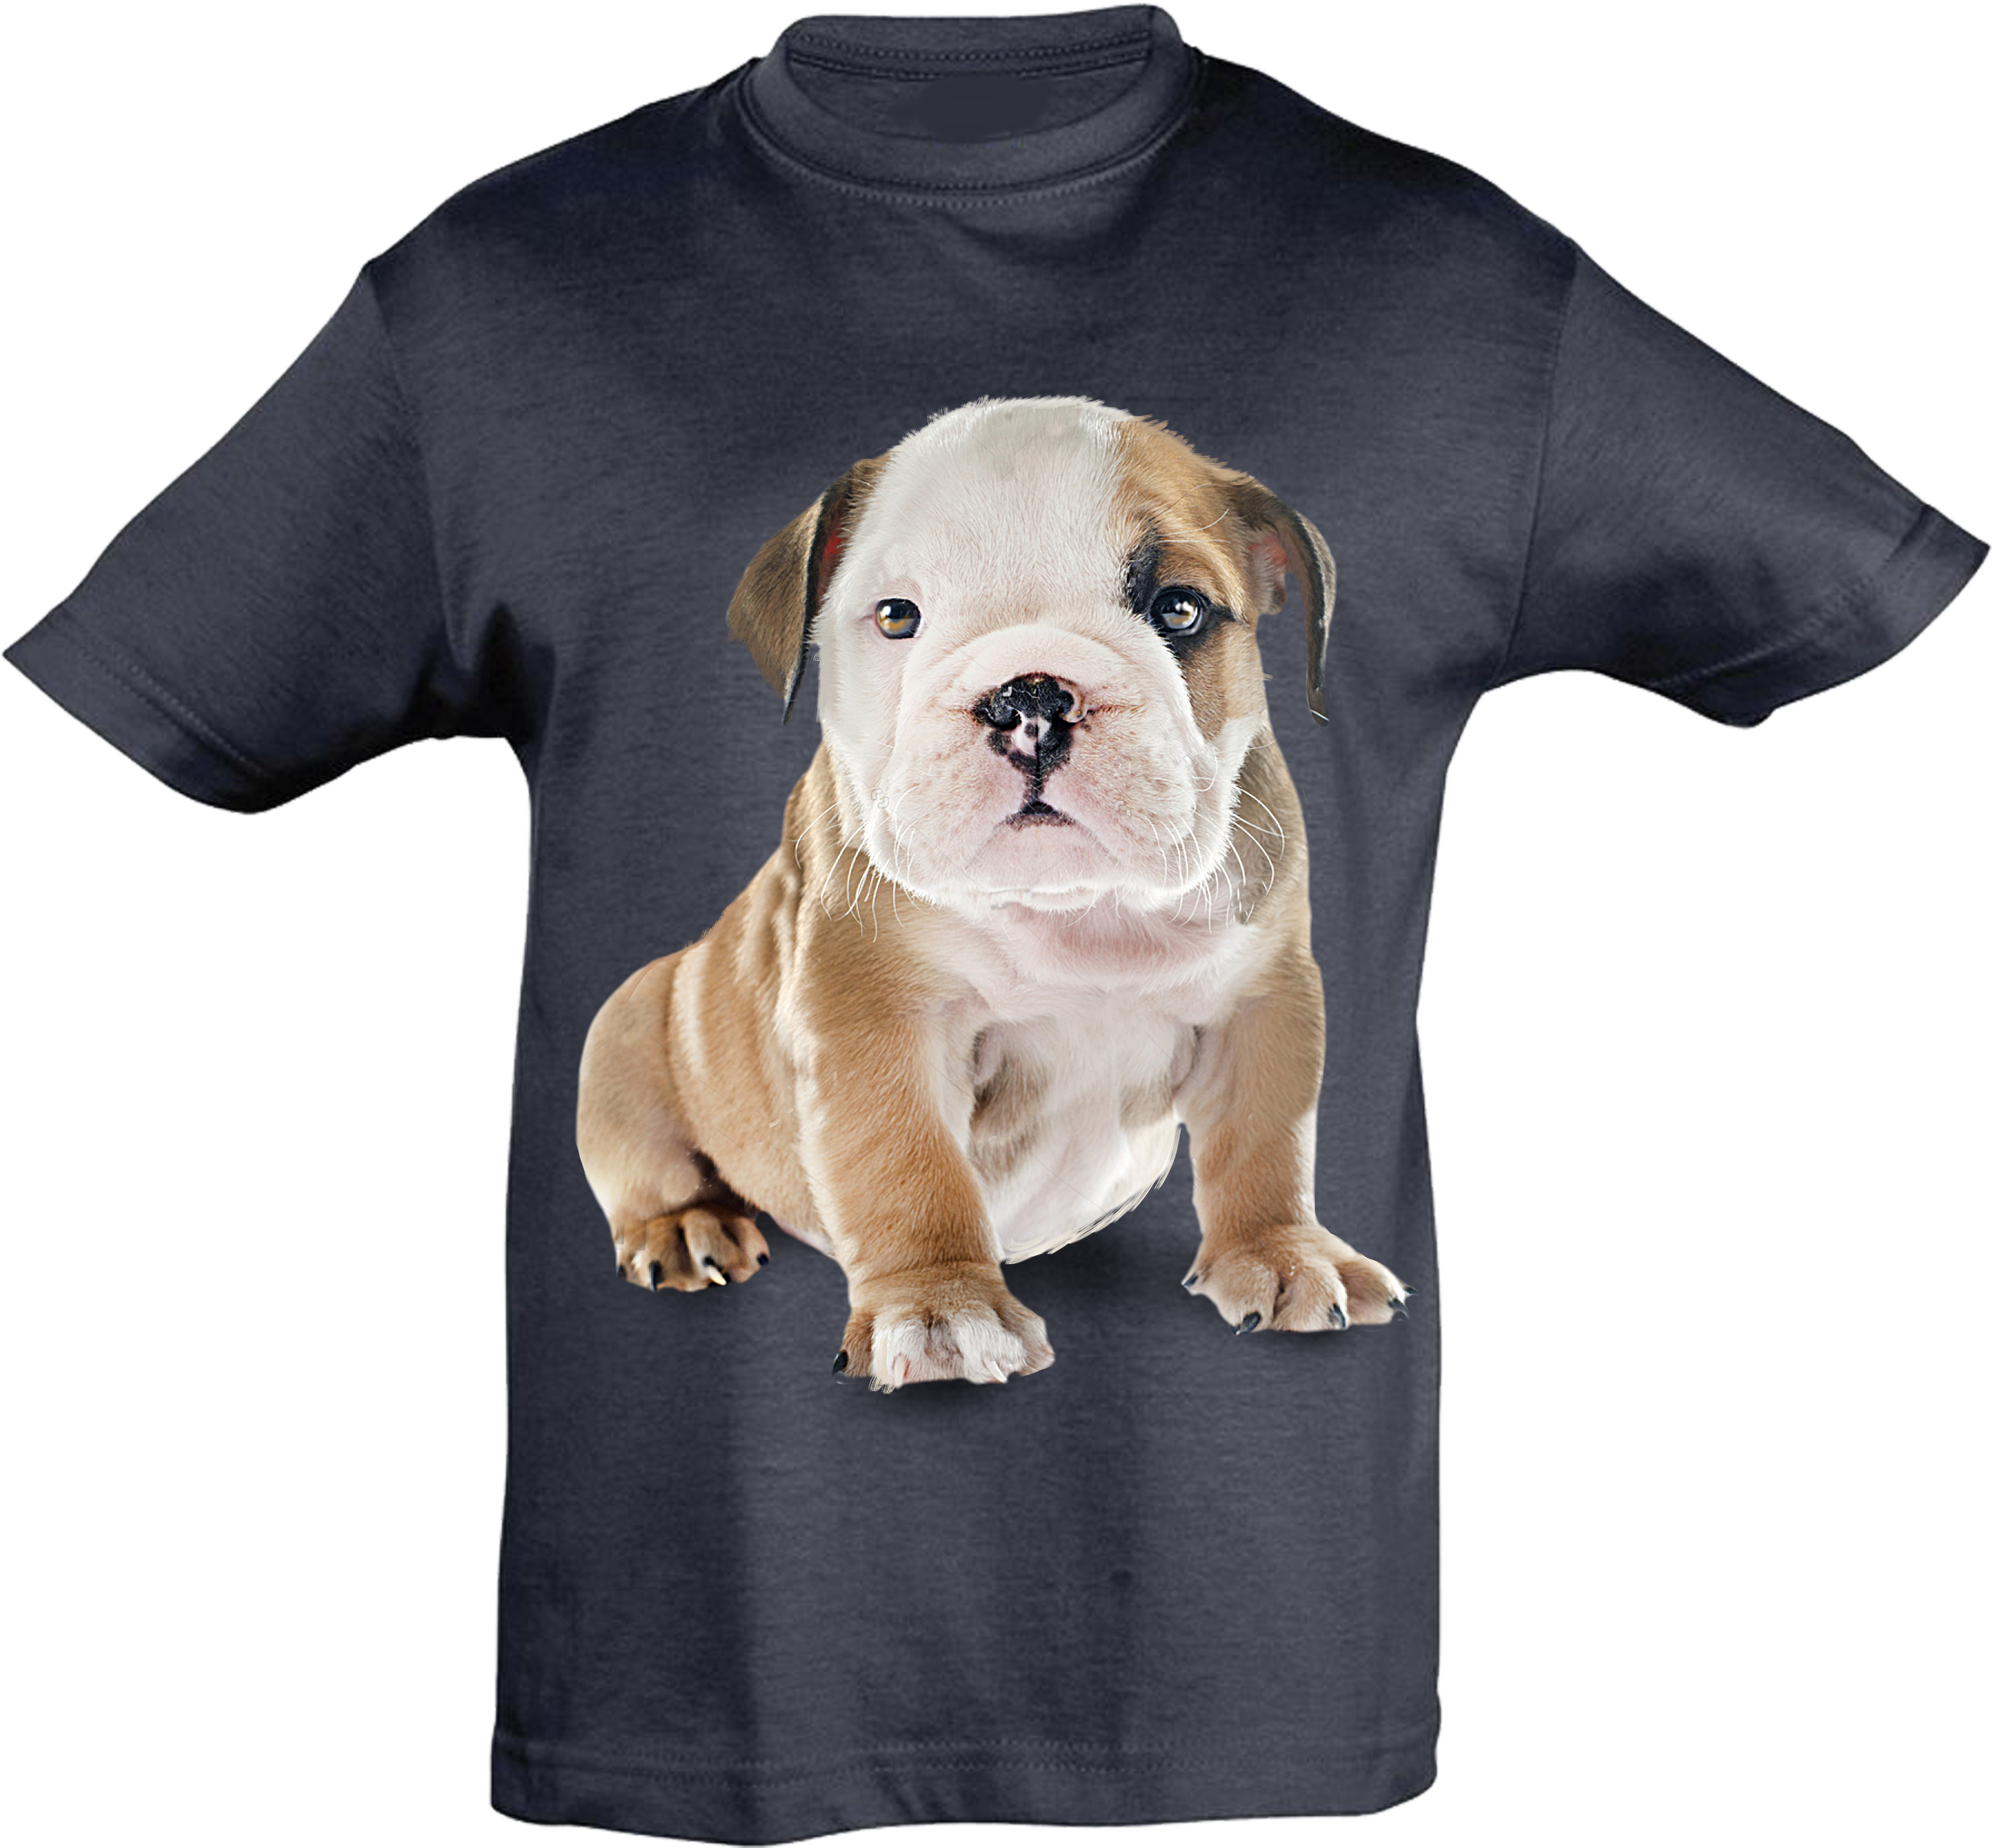 A T-shirt With A Dog On It